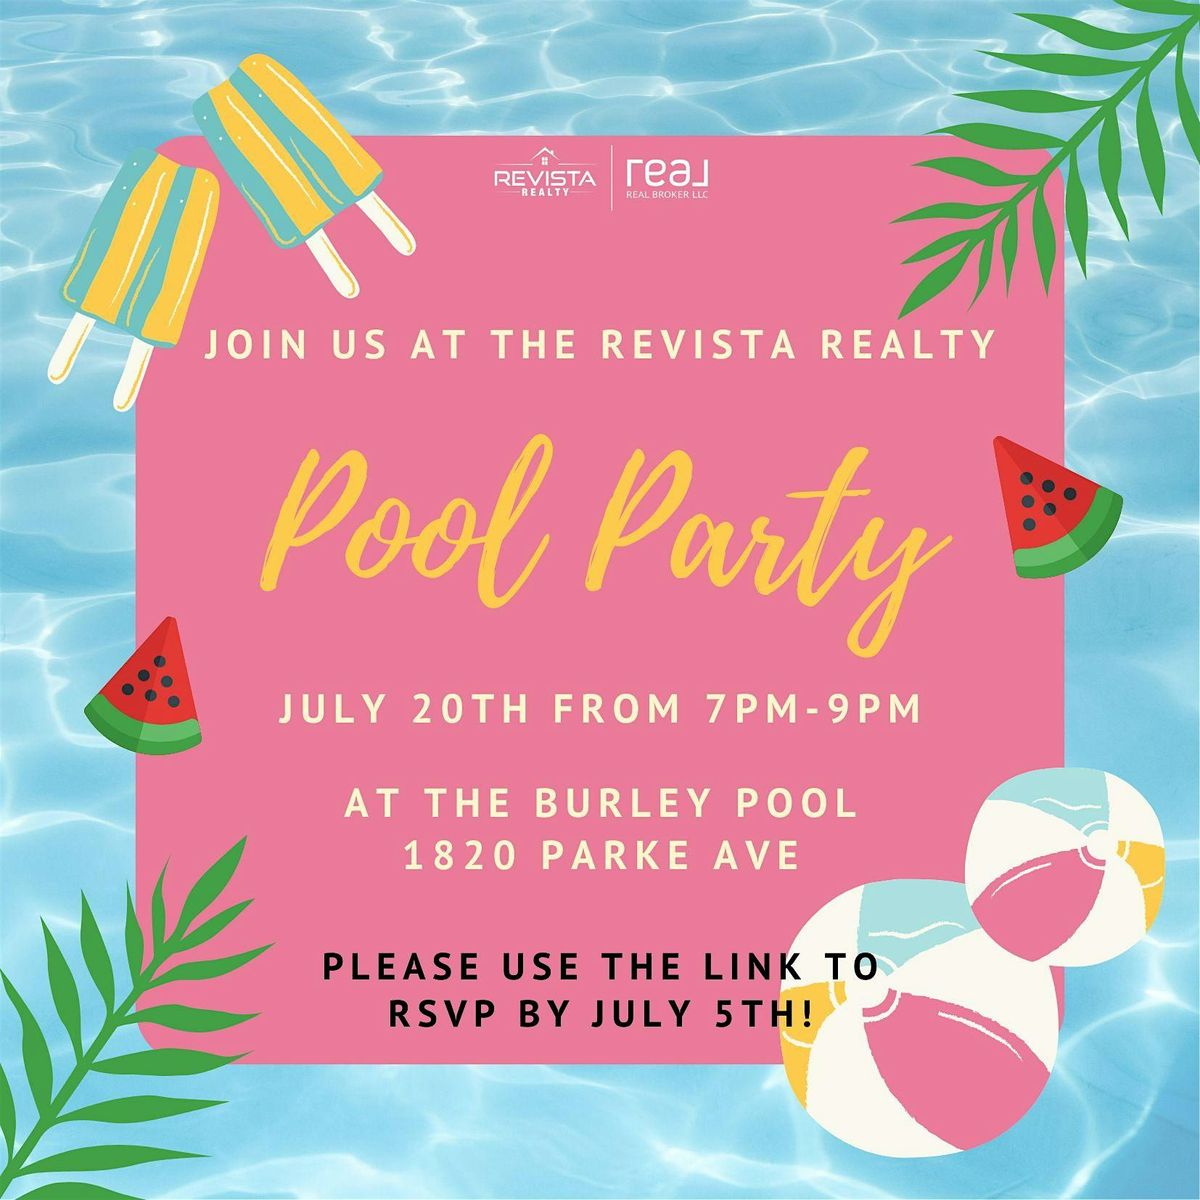 Pool Party with Revista Realty